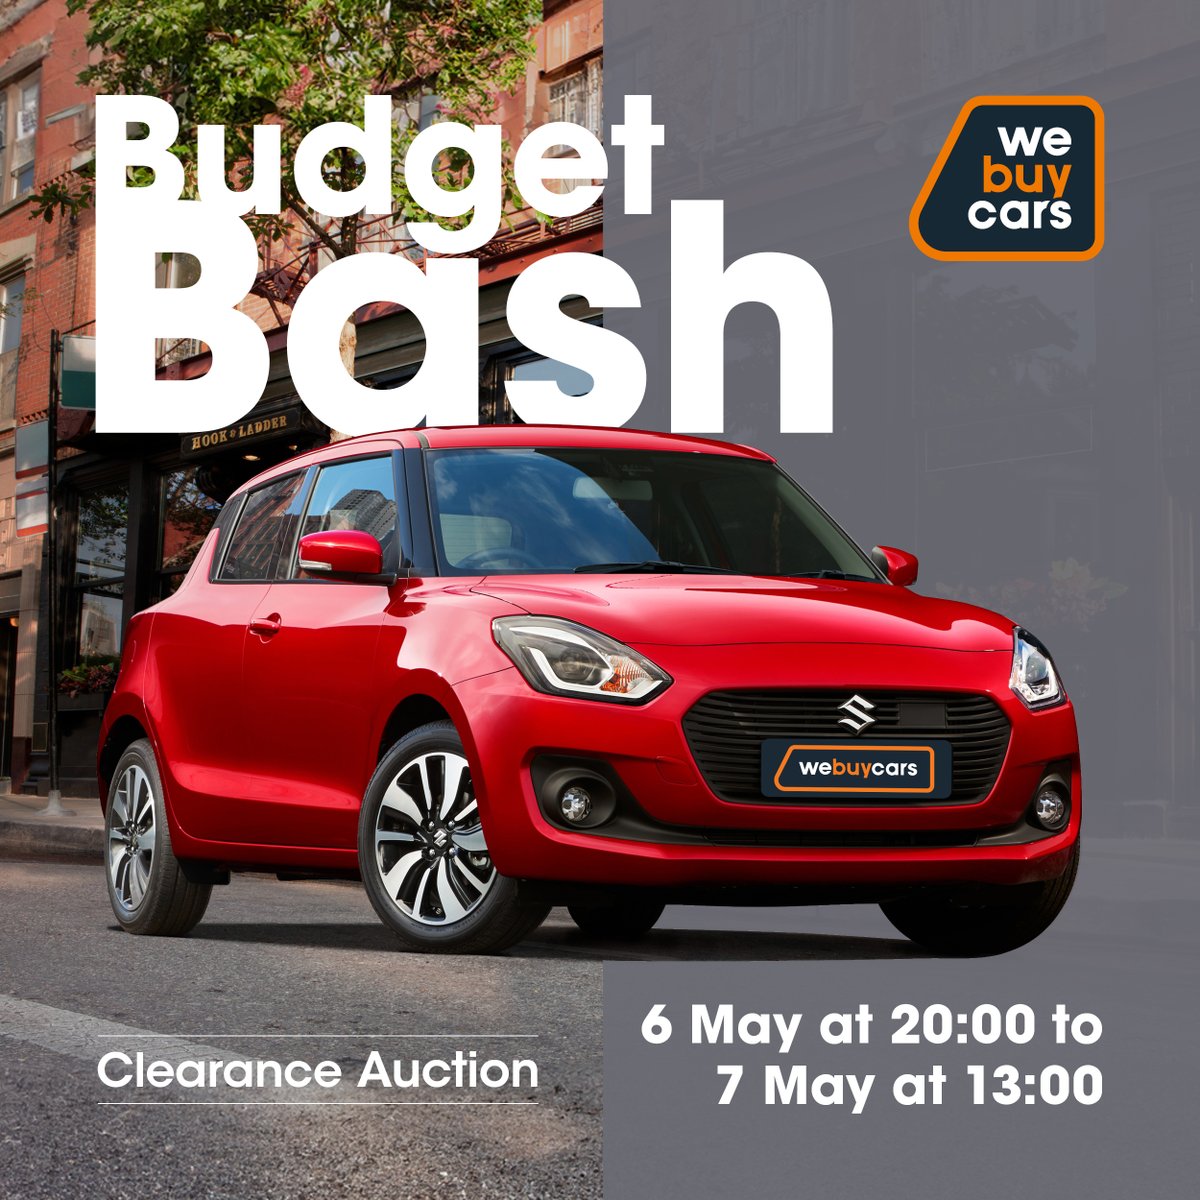 Did someone say #WeBuyCars Clearance Auction? Don't forget to place your bids on the 6th of May, you'll definitely find something to suit your budget 🚗💸 #carsforsale #preownedcars #autoauction #usedcarsforsale #carshopping #carfinance #autosales #carsales #carlifestyle